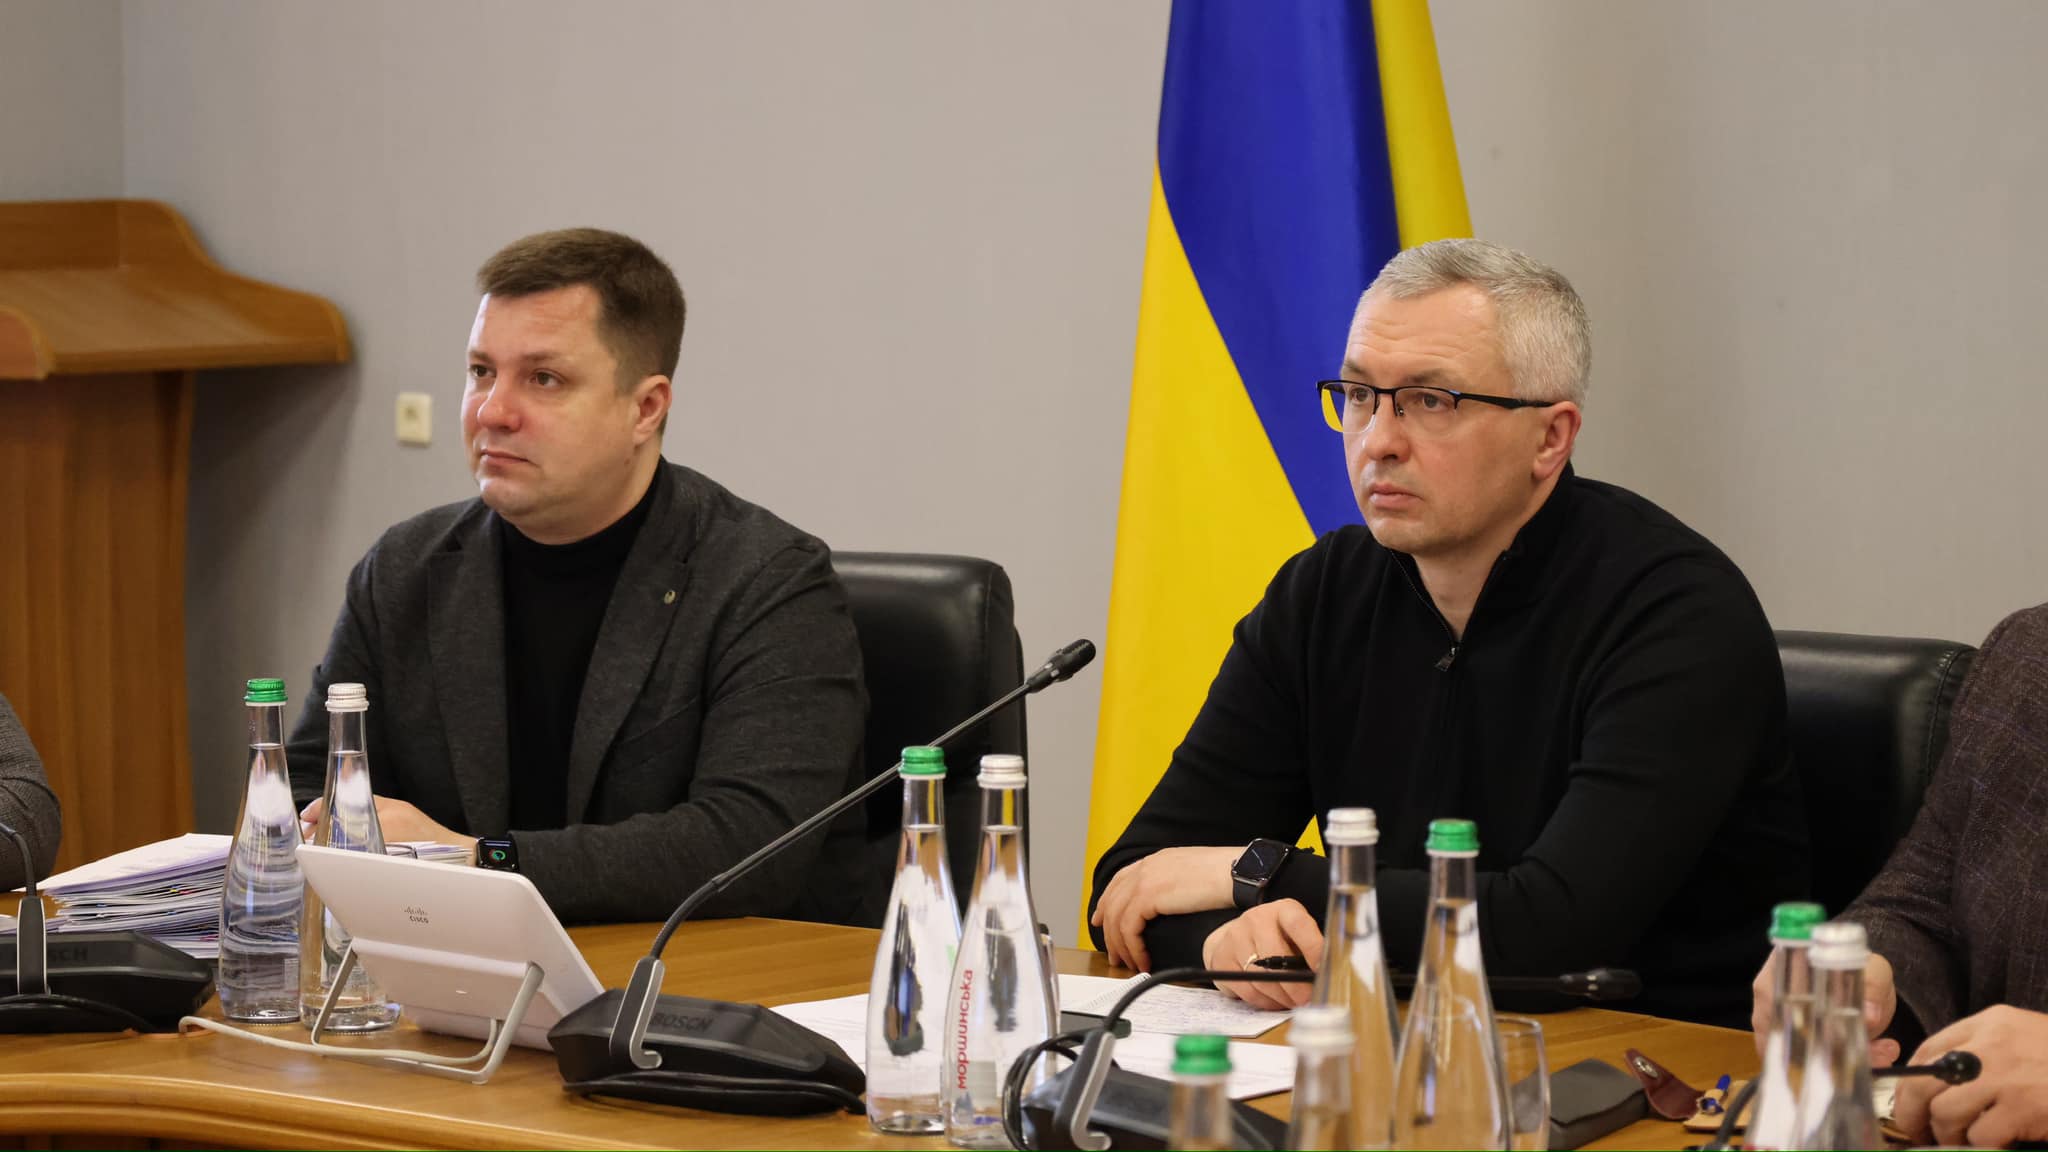 Implementation of anti-corruption policy before joining the EU: the former Head of Polish customs shared his experience with Ukrainian colleagues